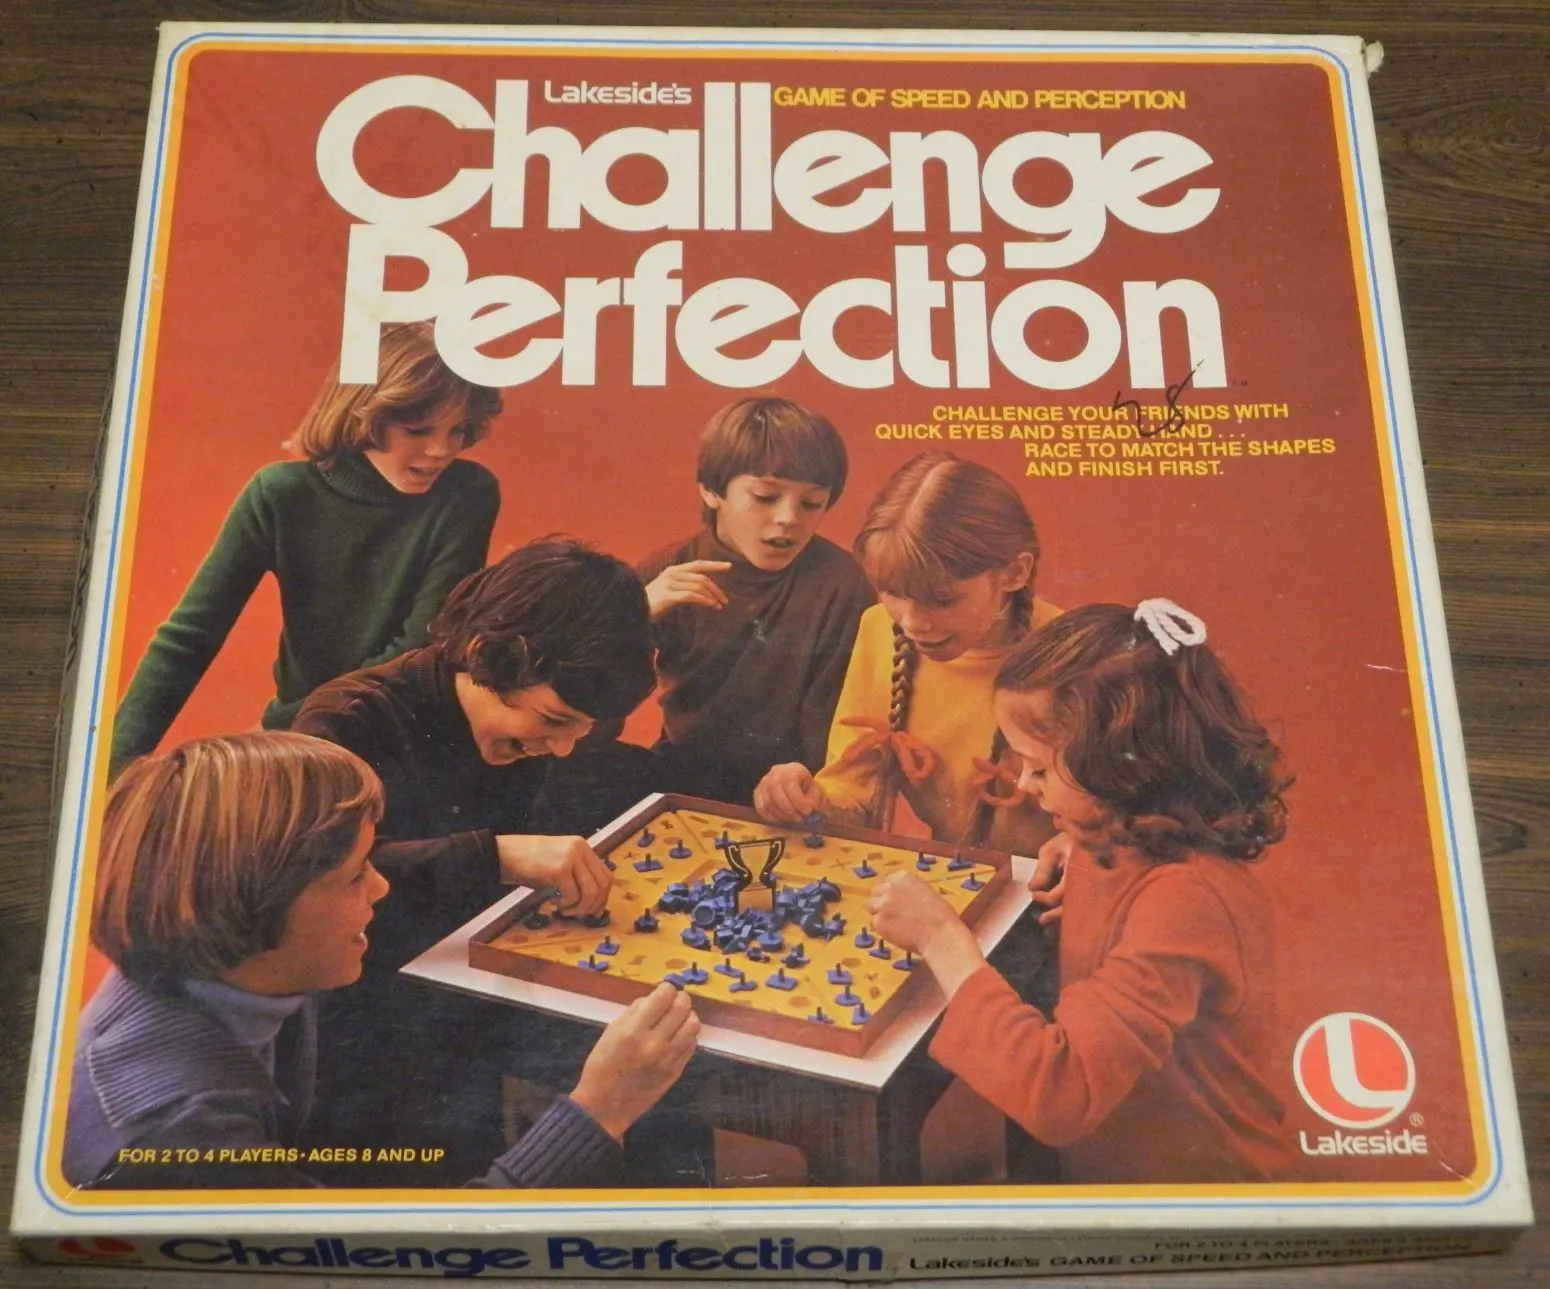 Vintage 1973 Perfection Skill Game Lakeside 97 Complete Works for sale online